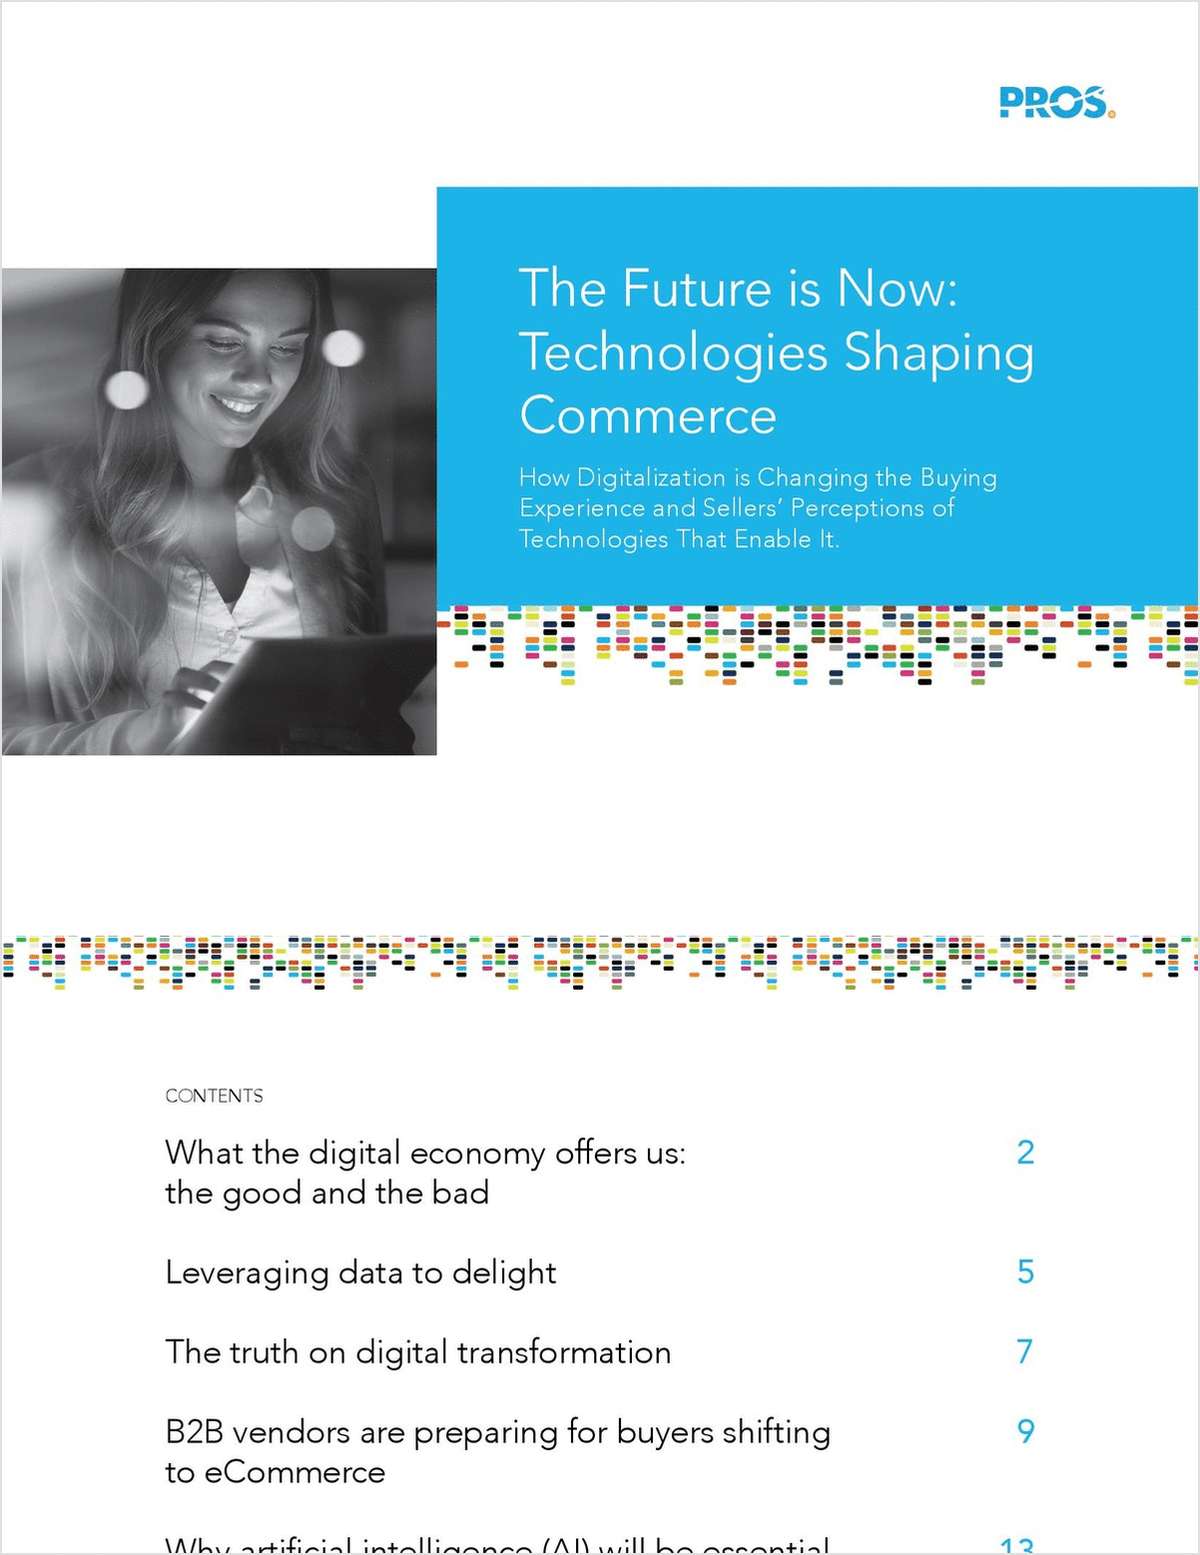 The Future is Now: Technologies Shaping Commerce